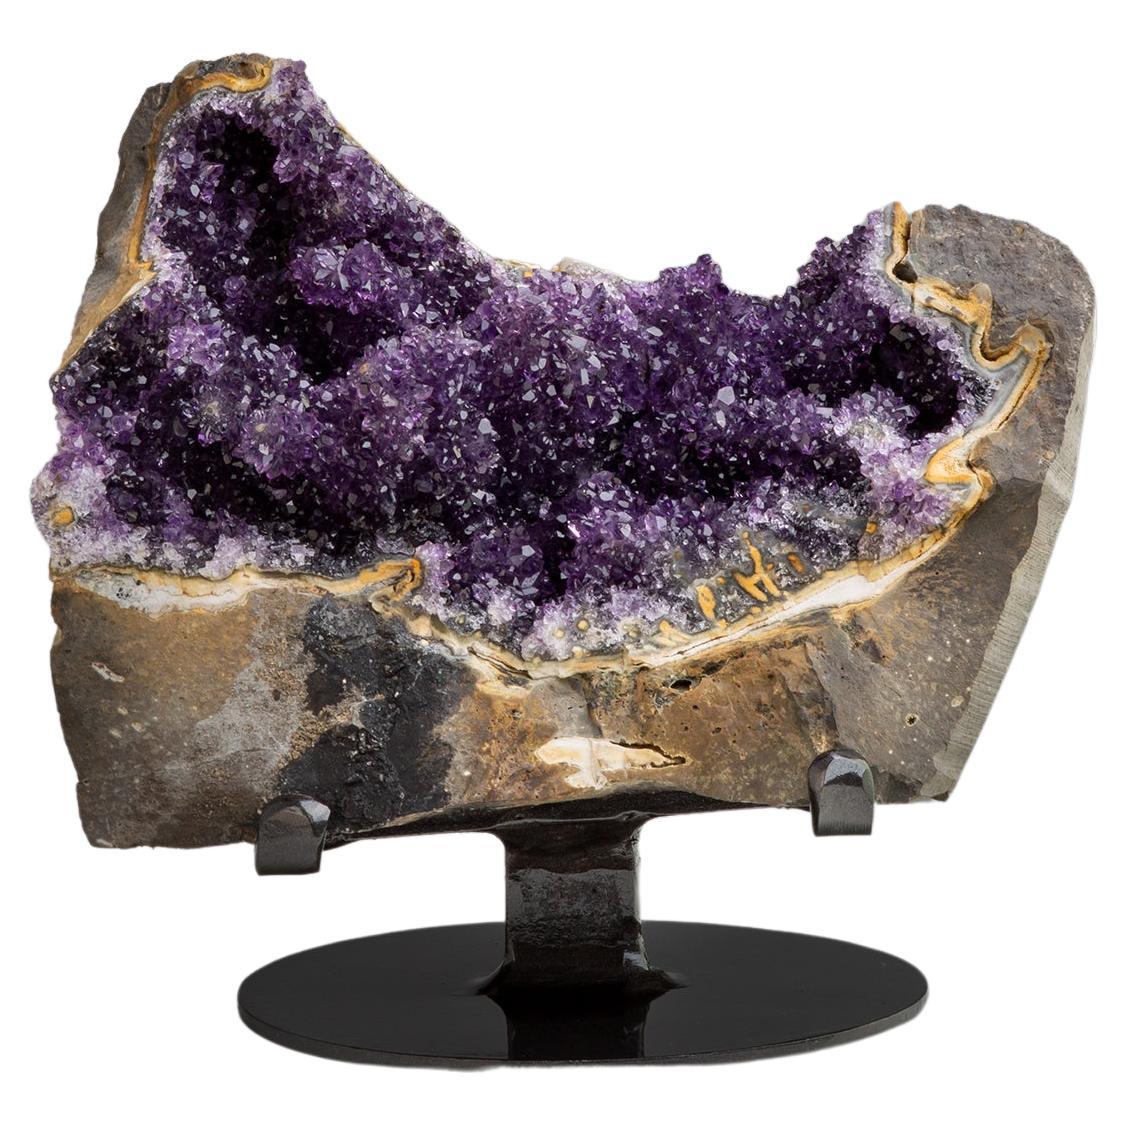 Rough geode section with contrasting amethyst For Sale